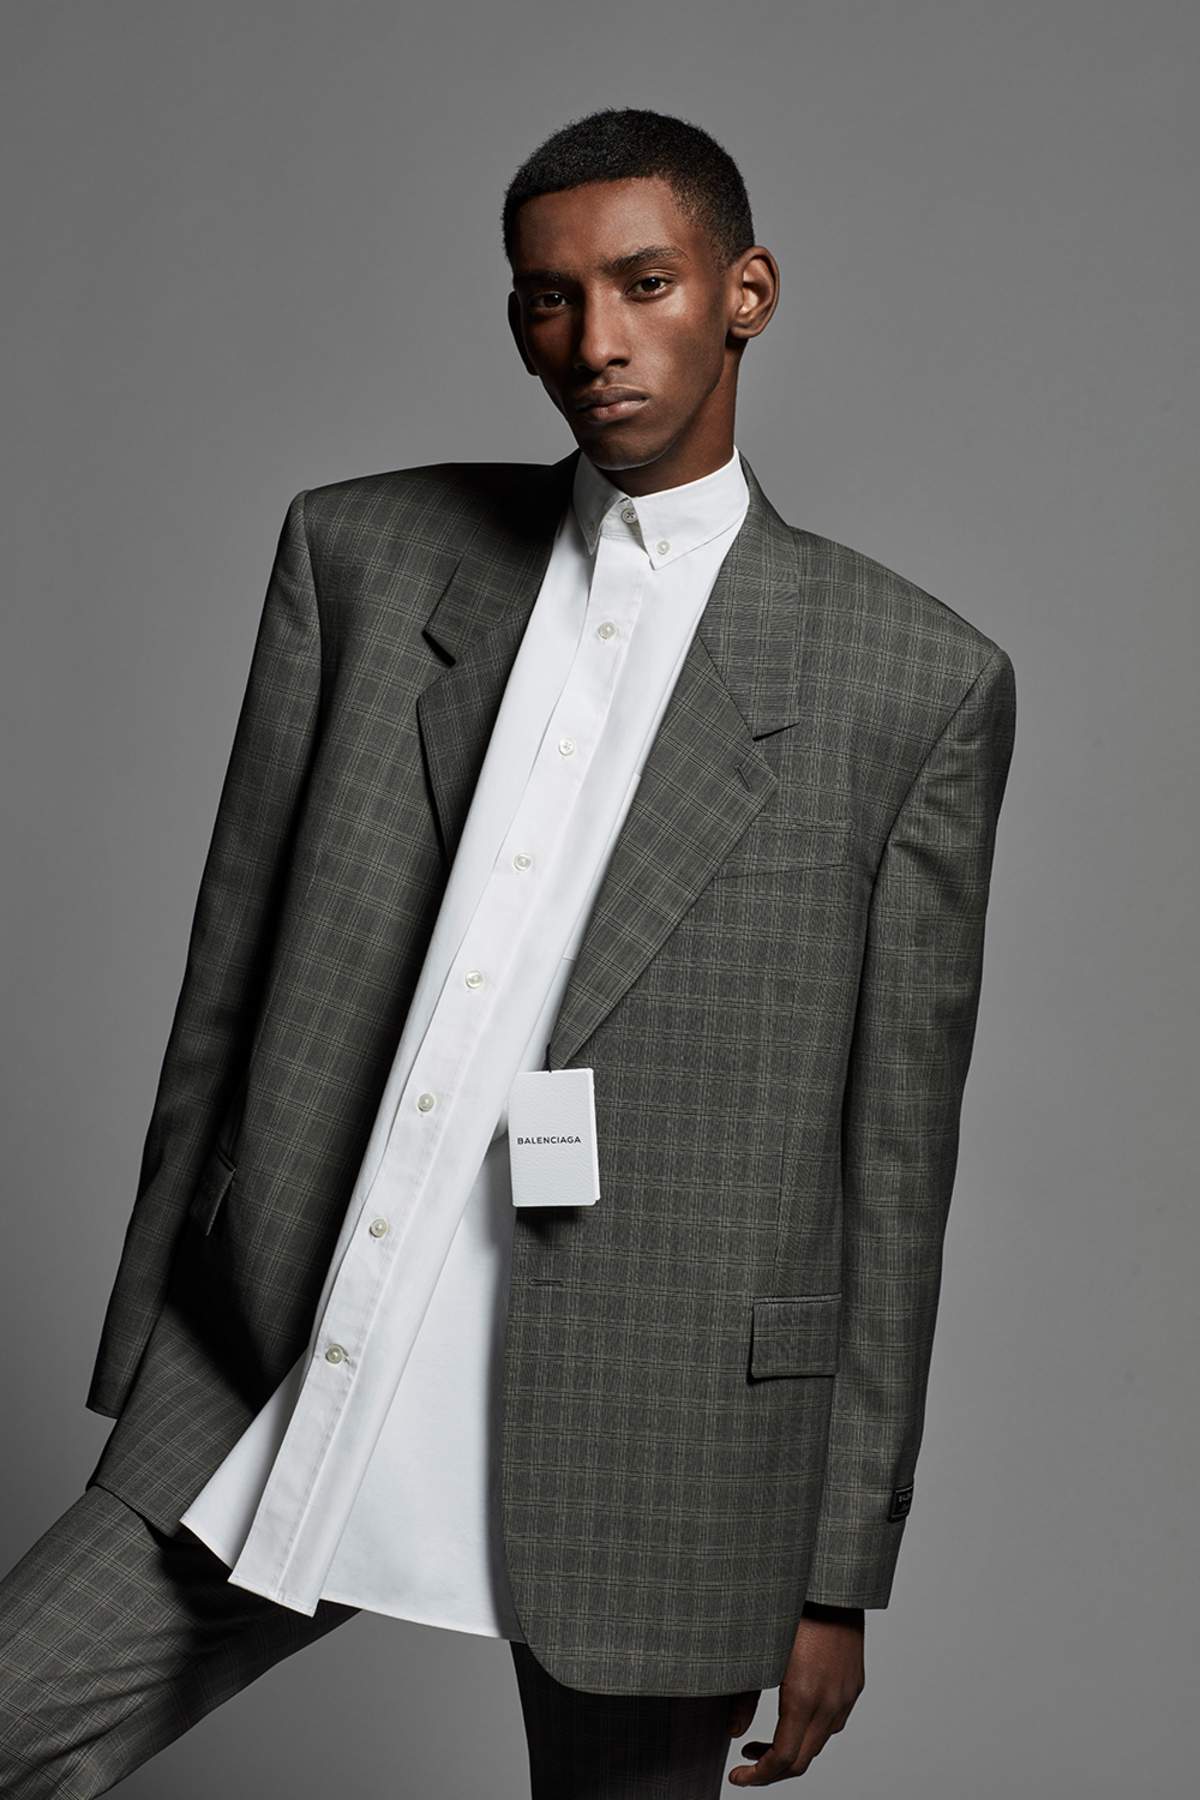 Why Oversized Clothing Is The Next Big Thing | The Journal | MR PORTER